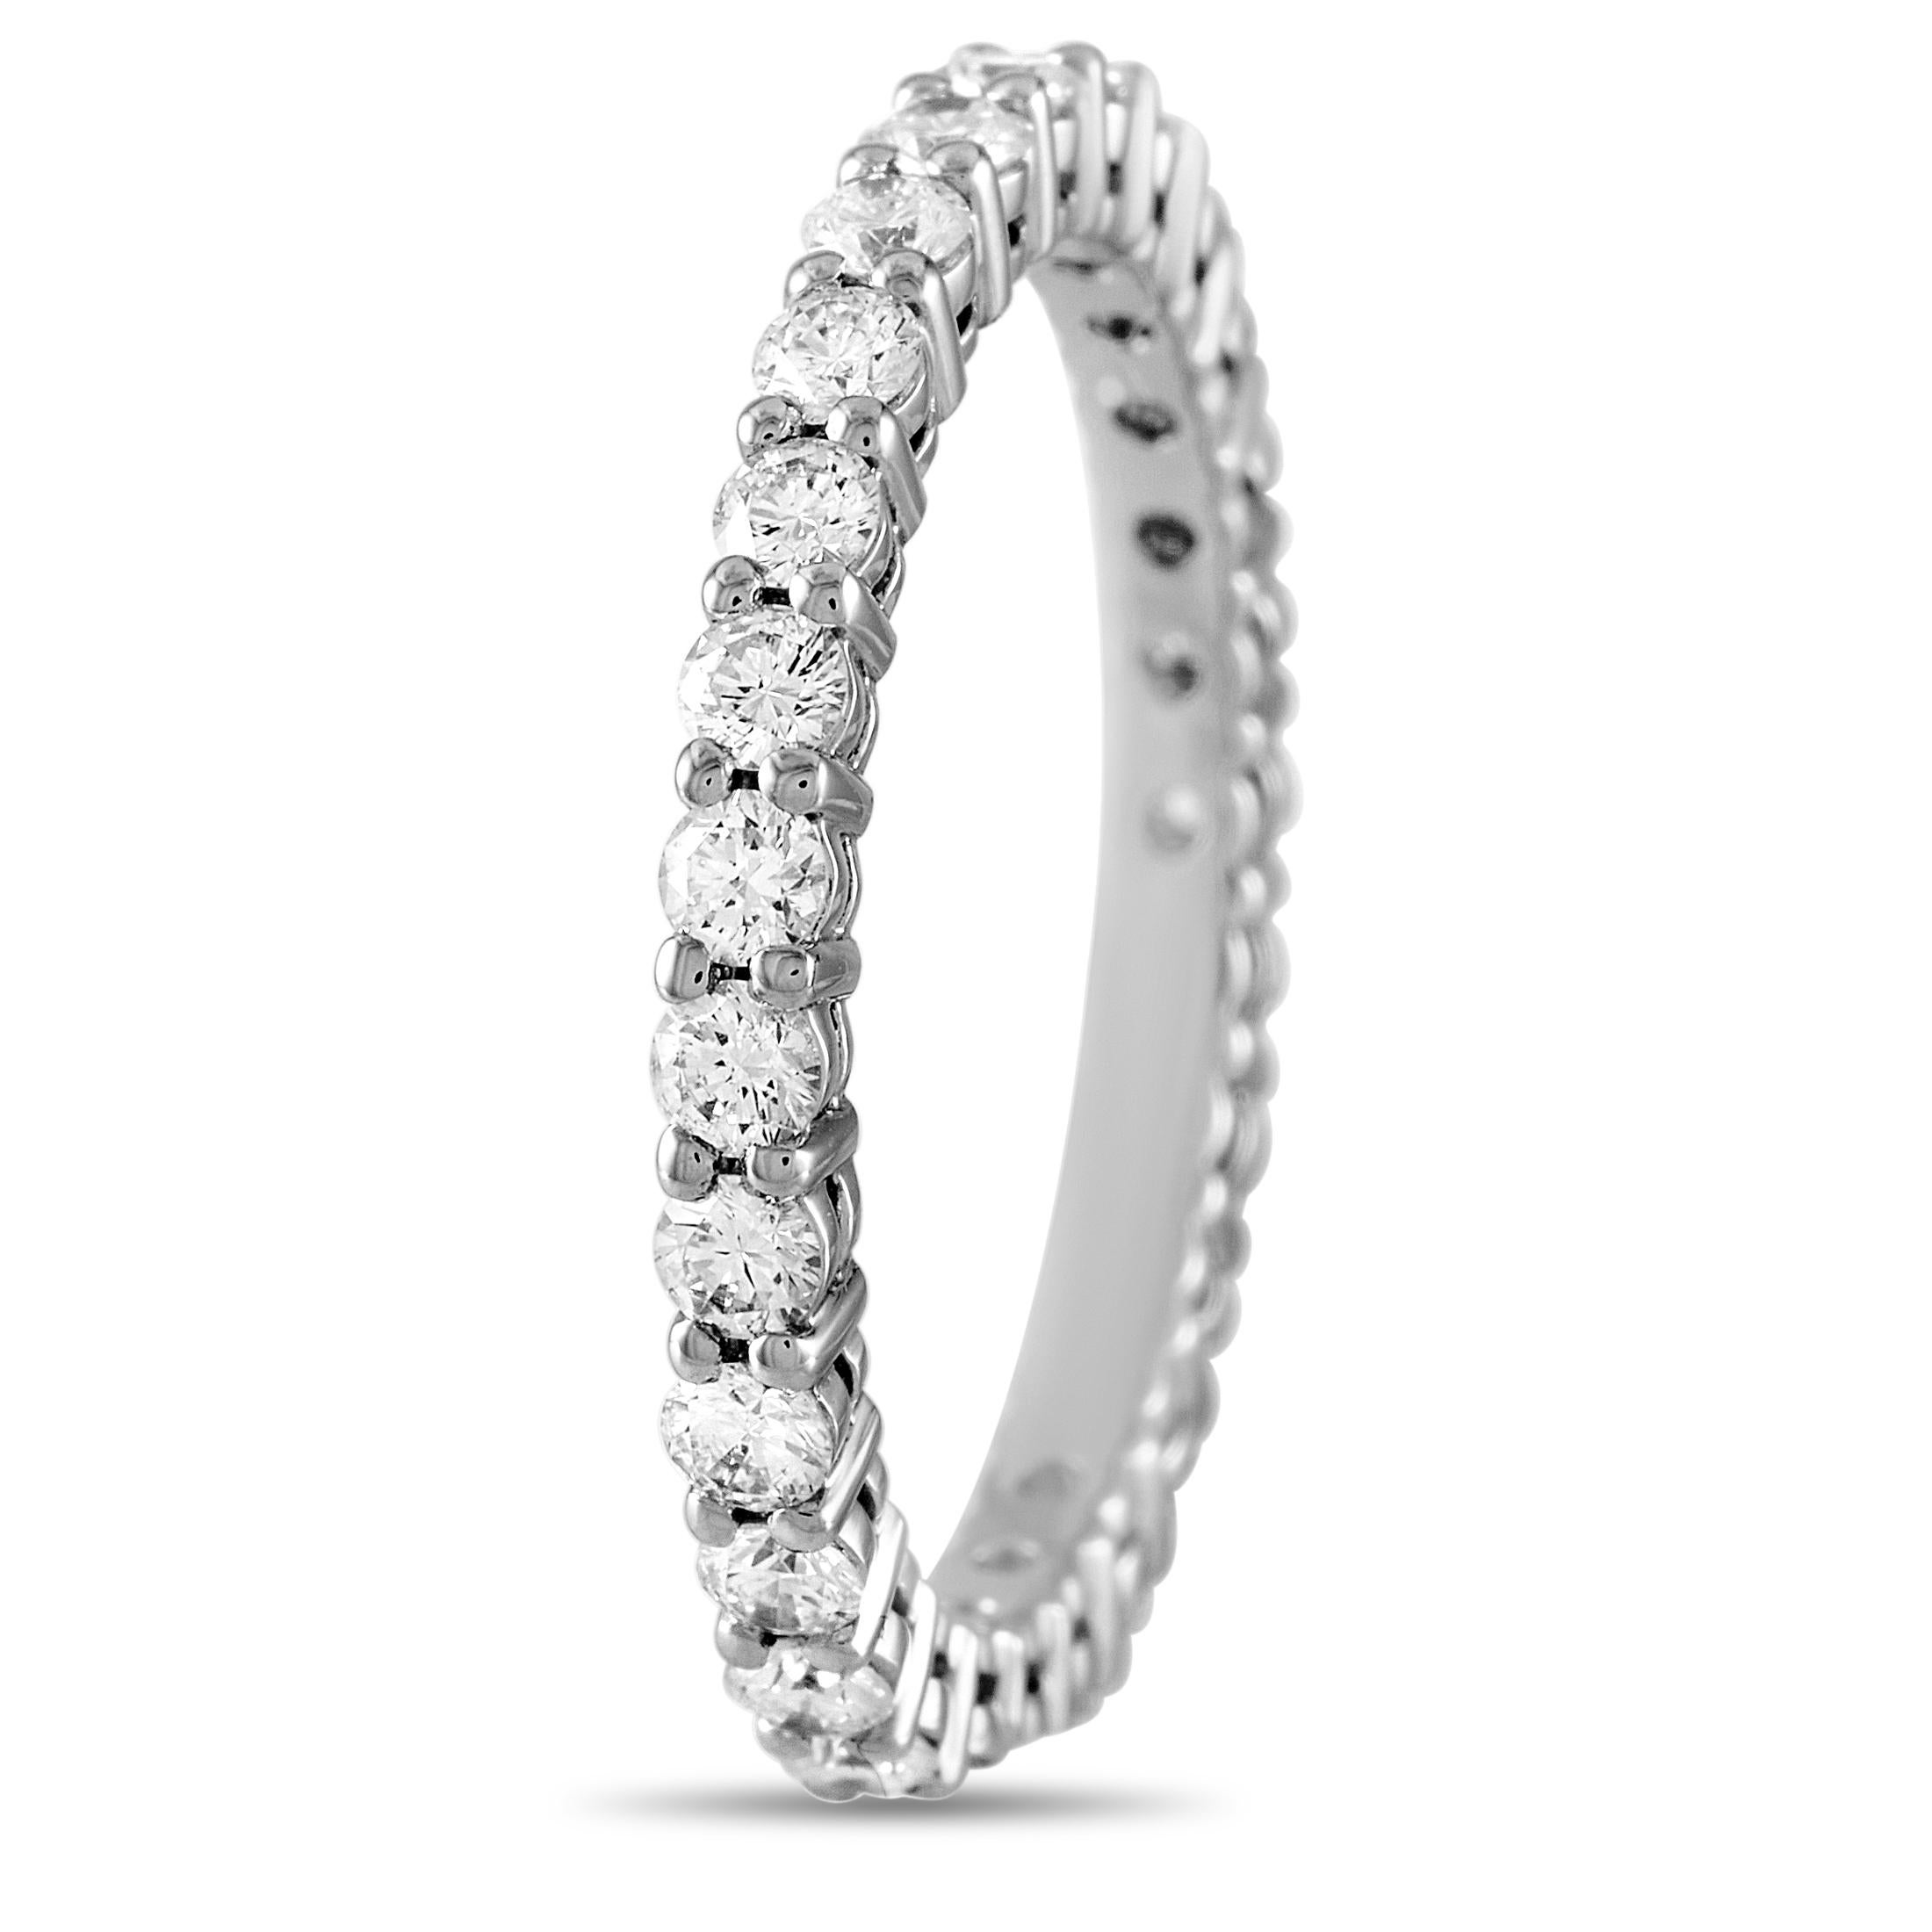 The Tiffany & Co. Platinum 1.00 ct Diamond Eternity Ring displays a full circle of pavé diamonds set around the entire 2mm platinum band. Consider this graceful ring, a circle of commitment, the perfect choice to mark a milestone in your love